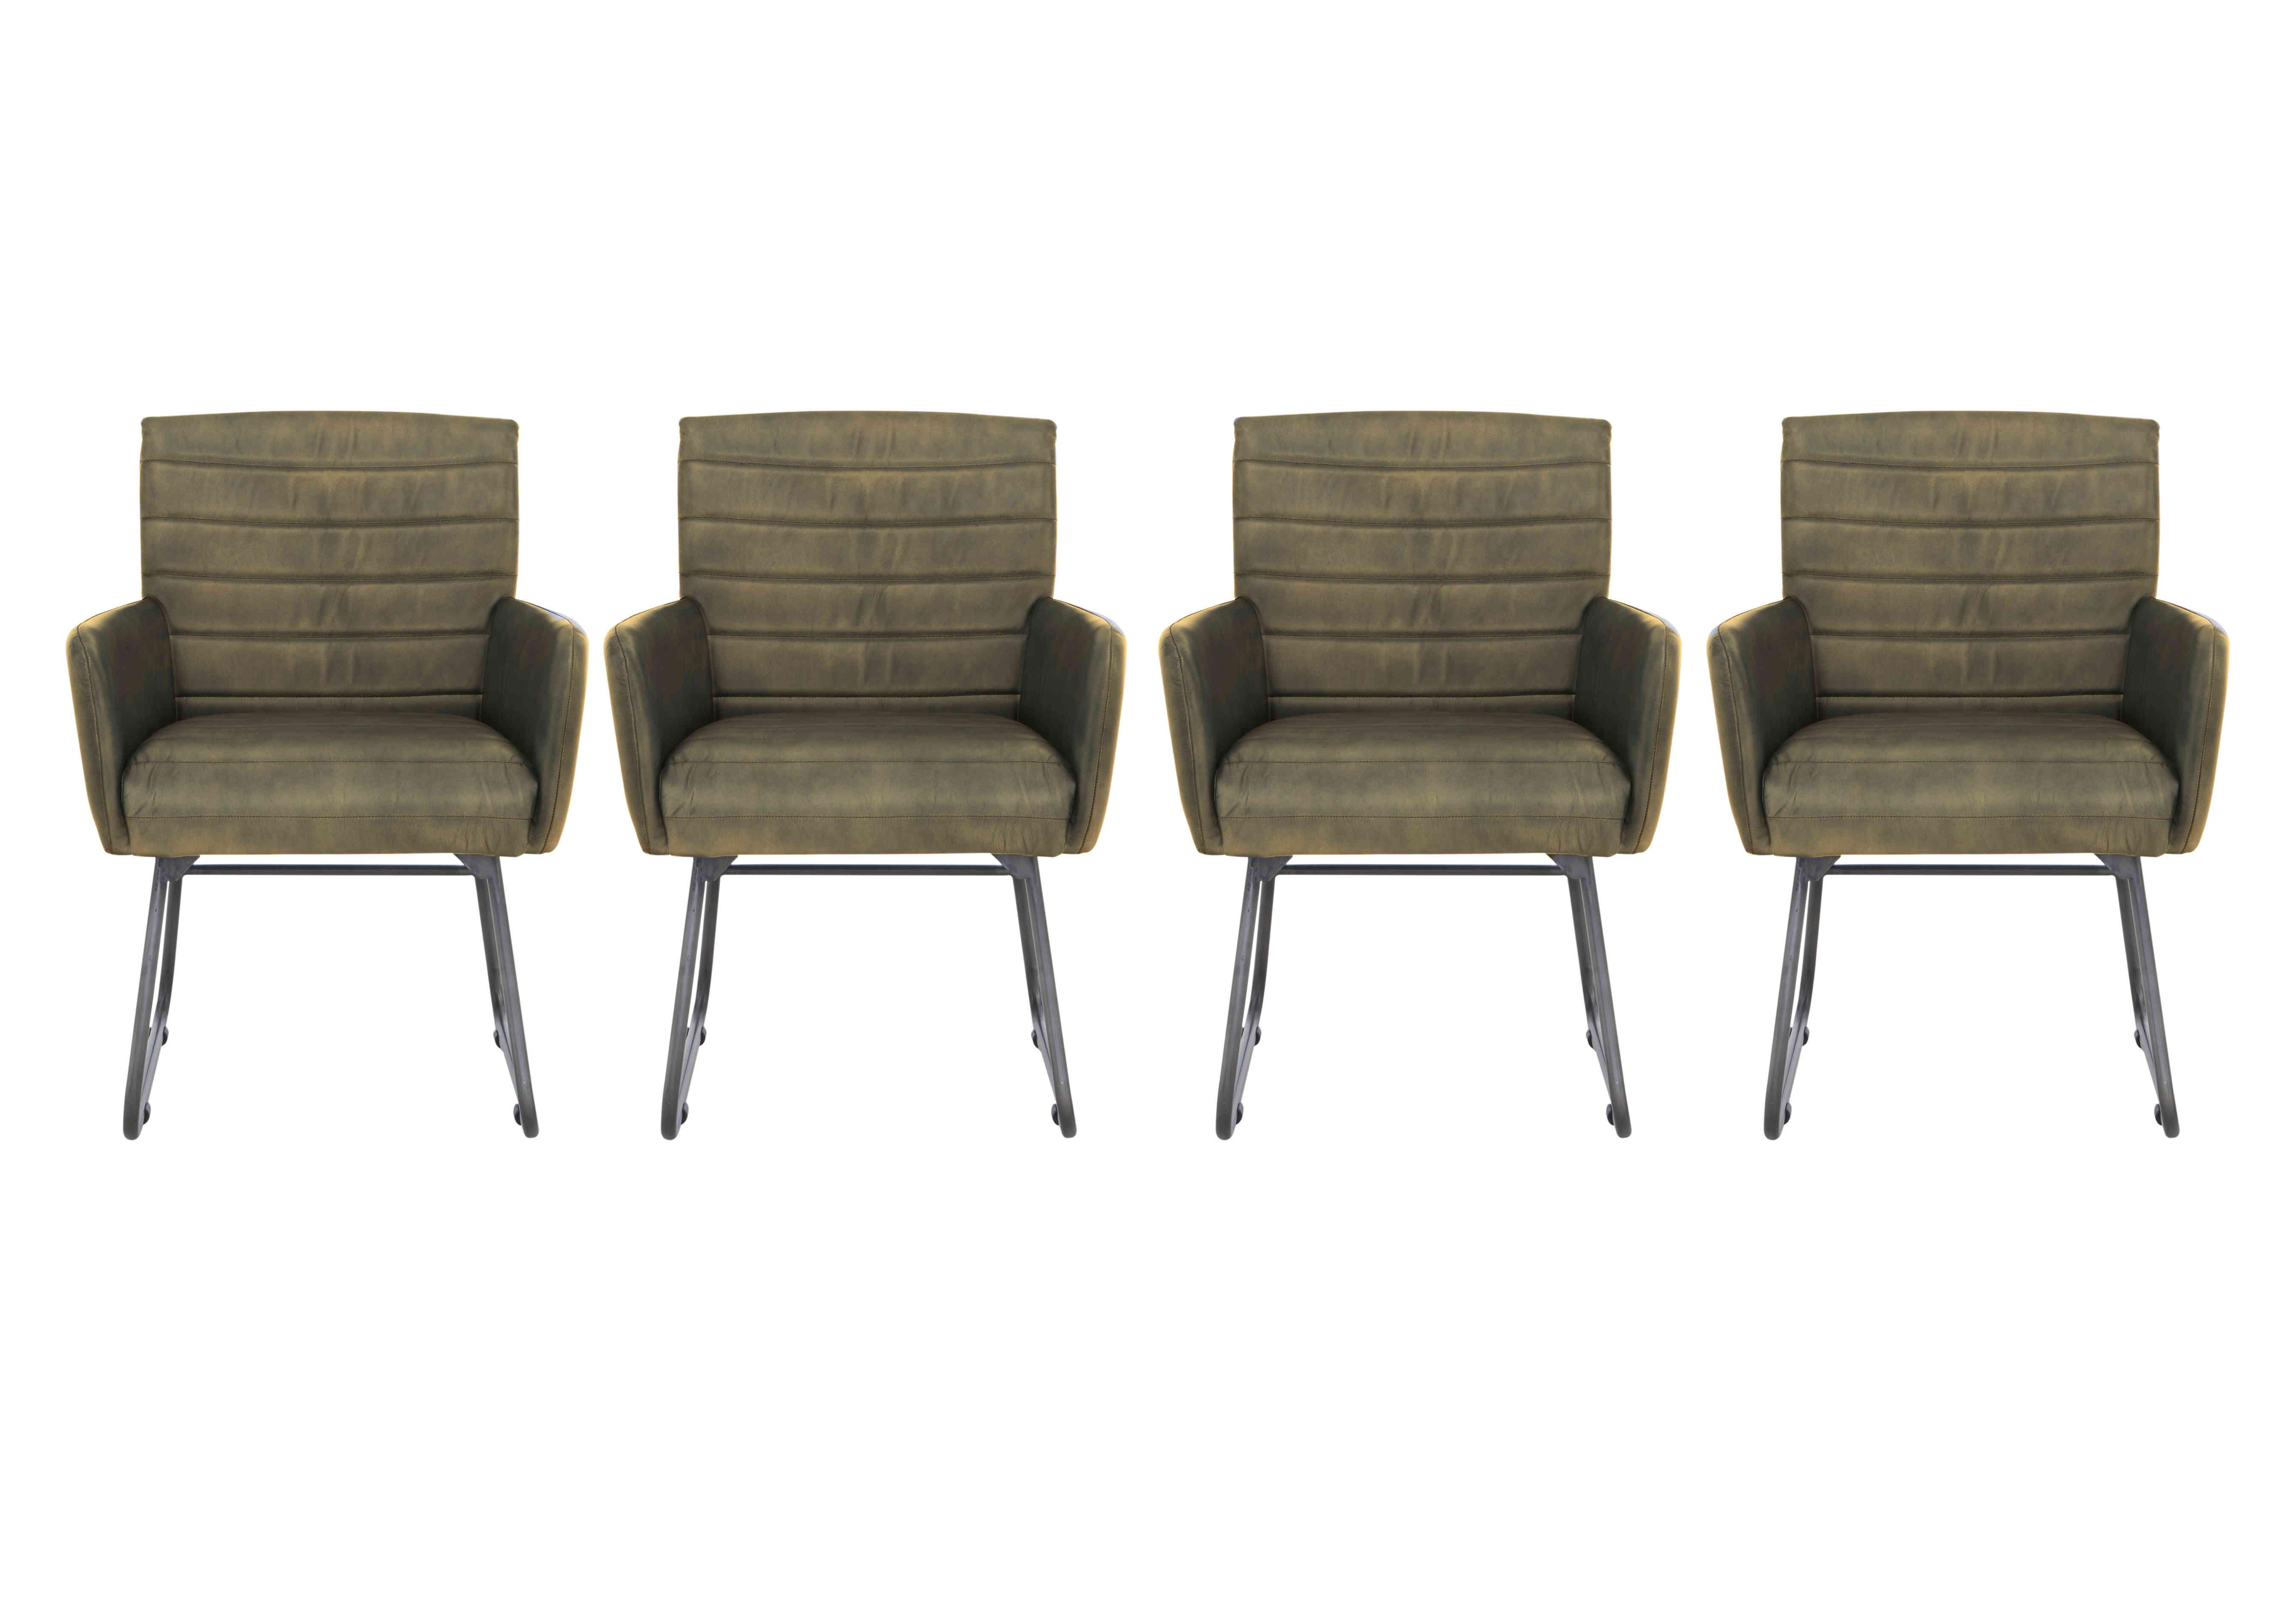 Sam Set of 4 Leather Dining Chairs in Olive on Furniture Village